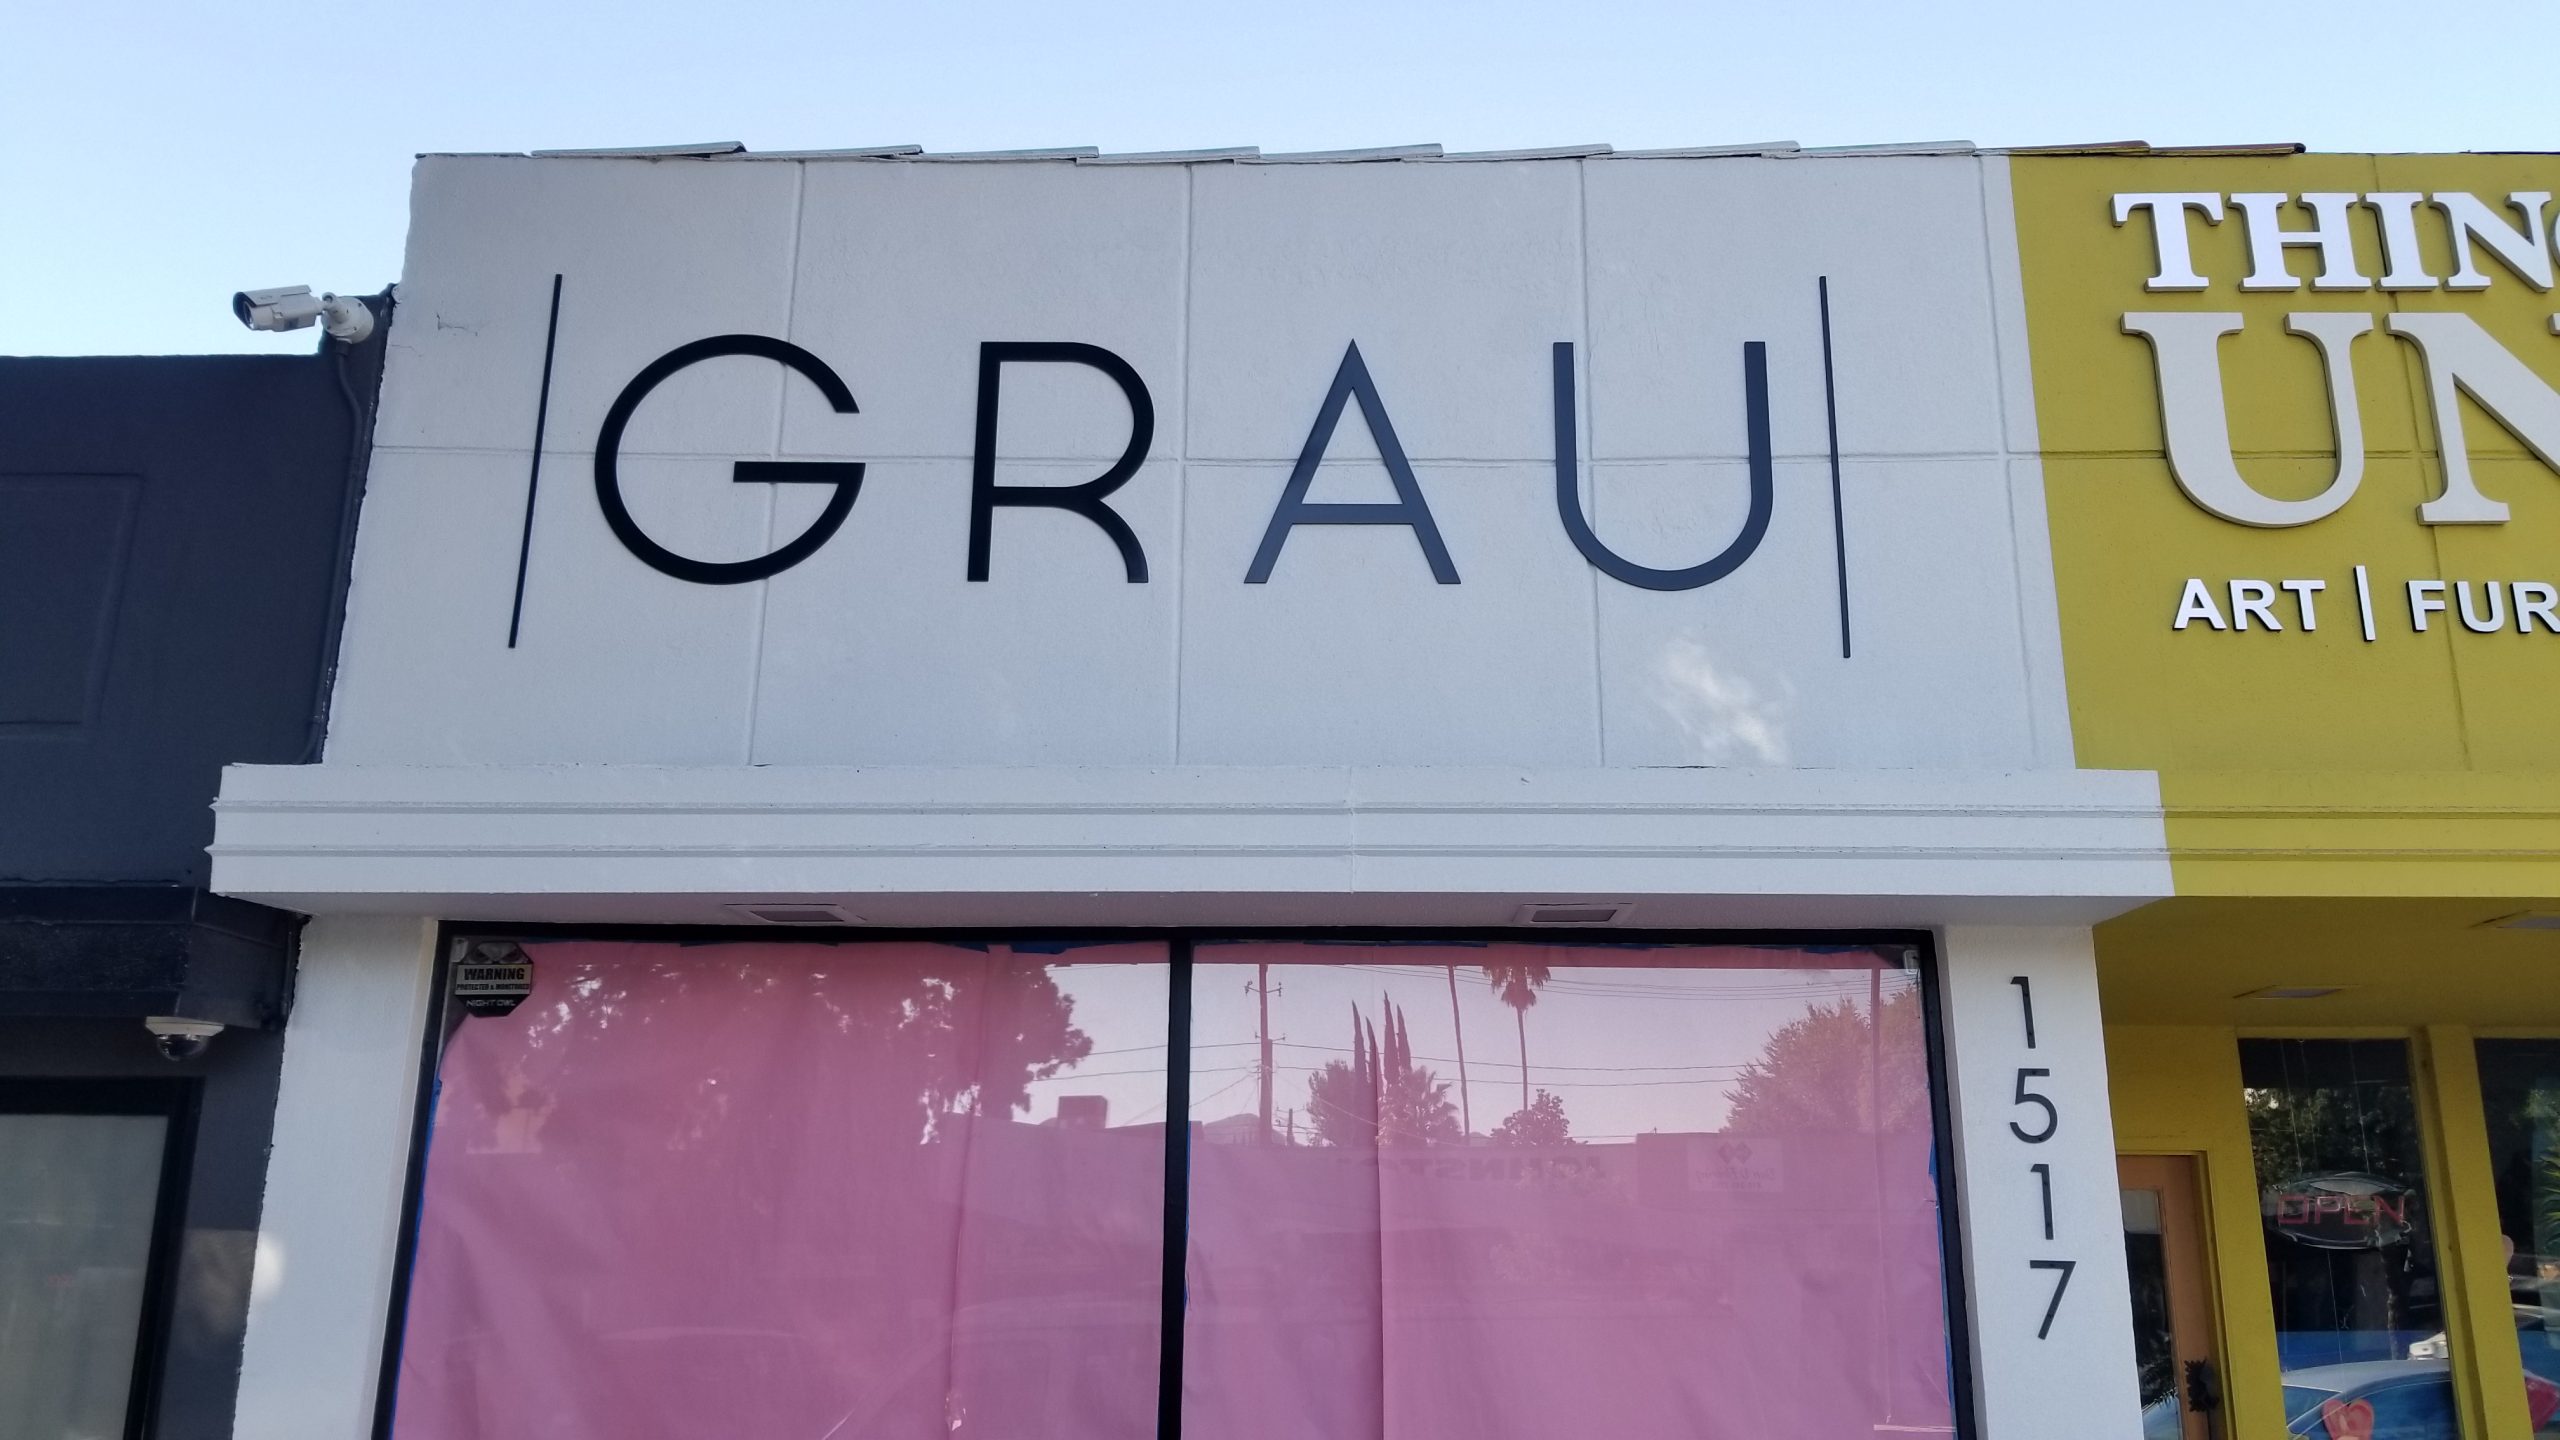 This is the storefront dimensional lettering we fabricated and installed for GRAU Women's Boutique in Burbank.